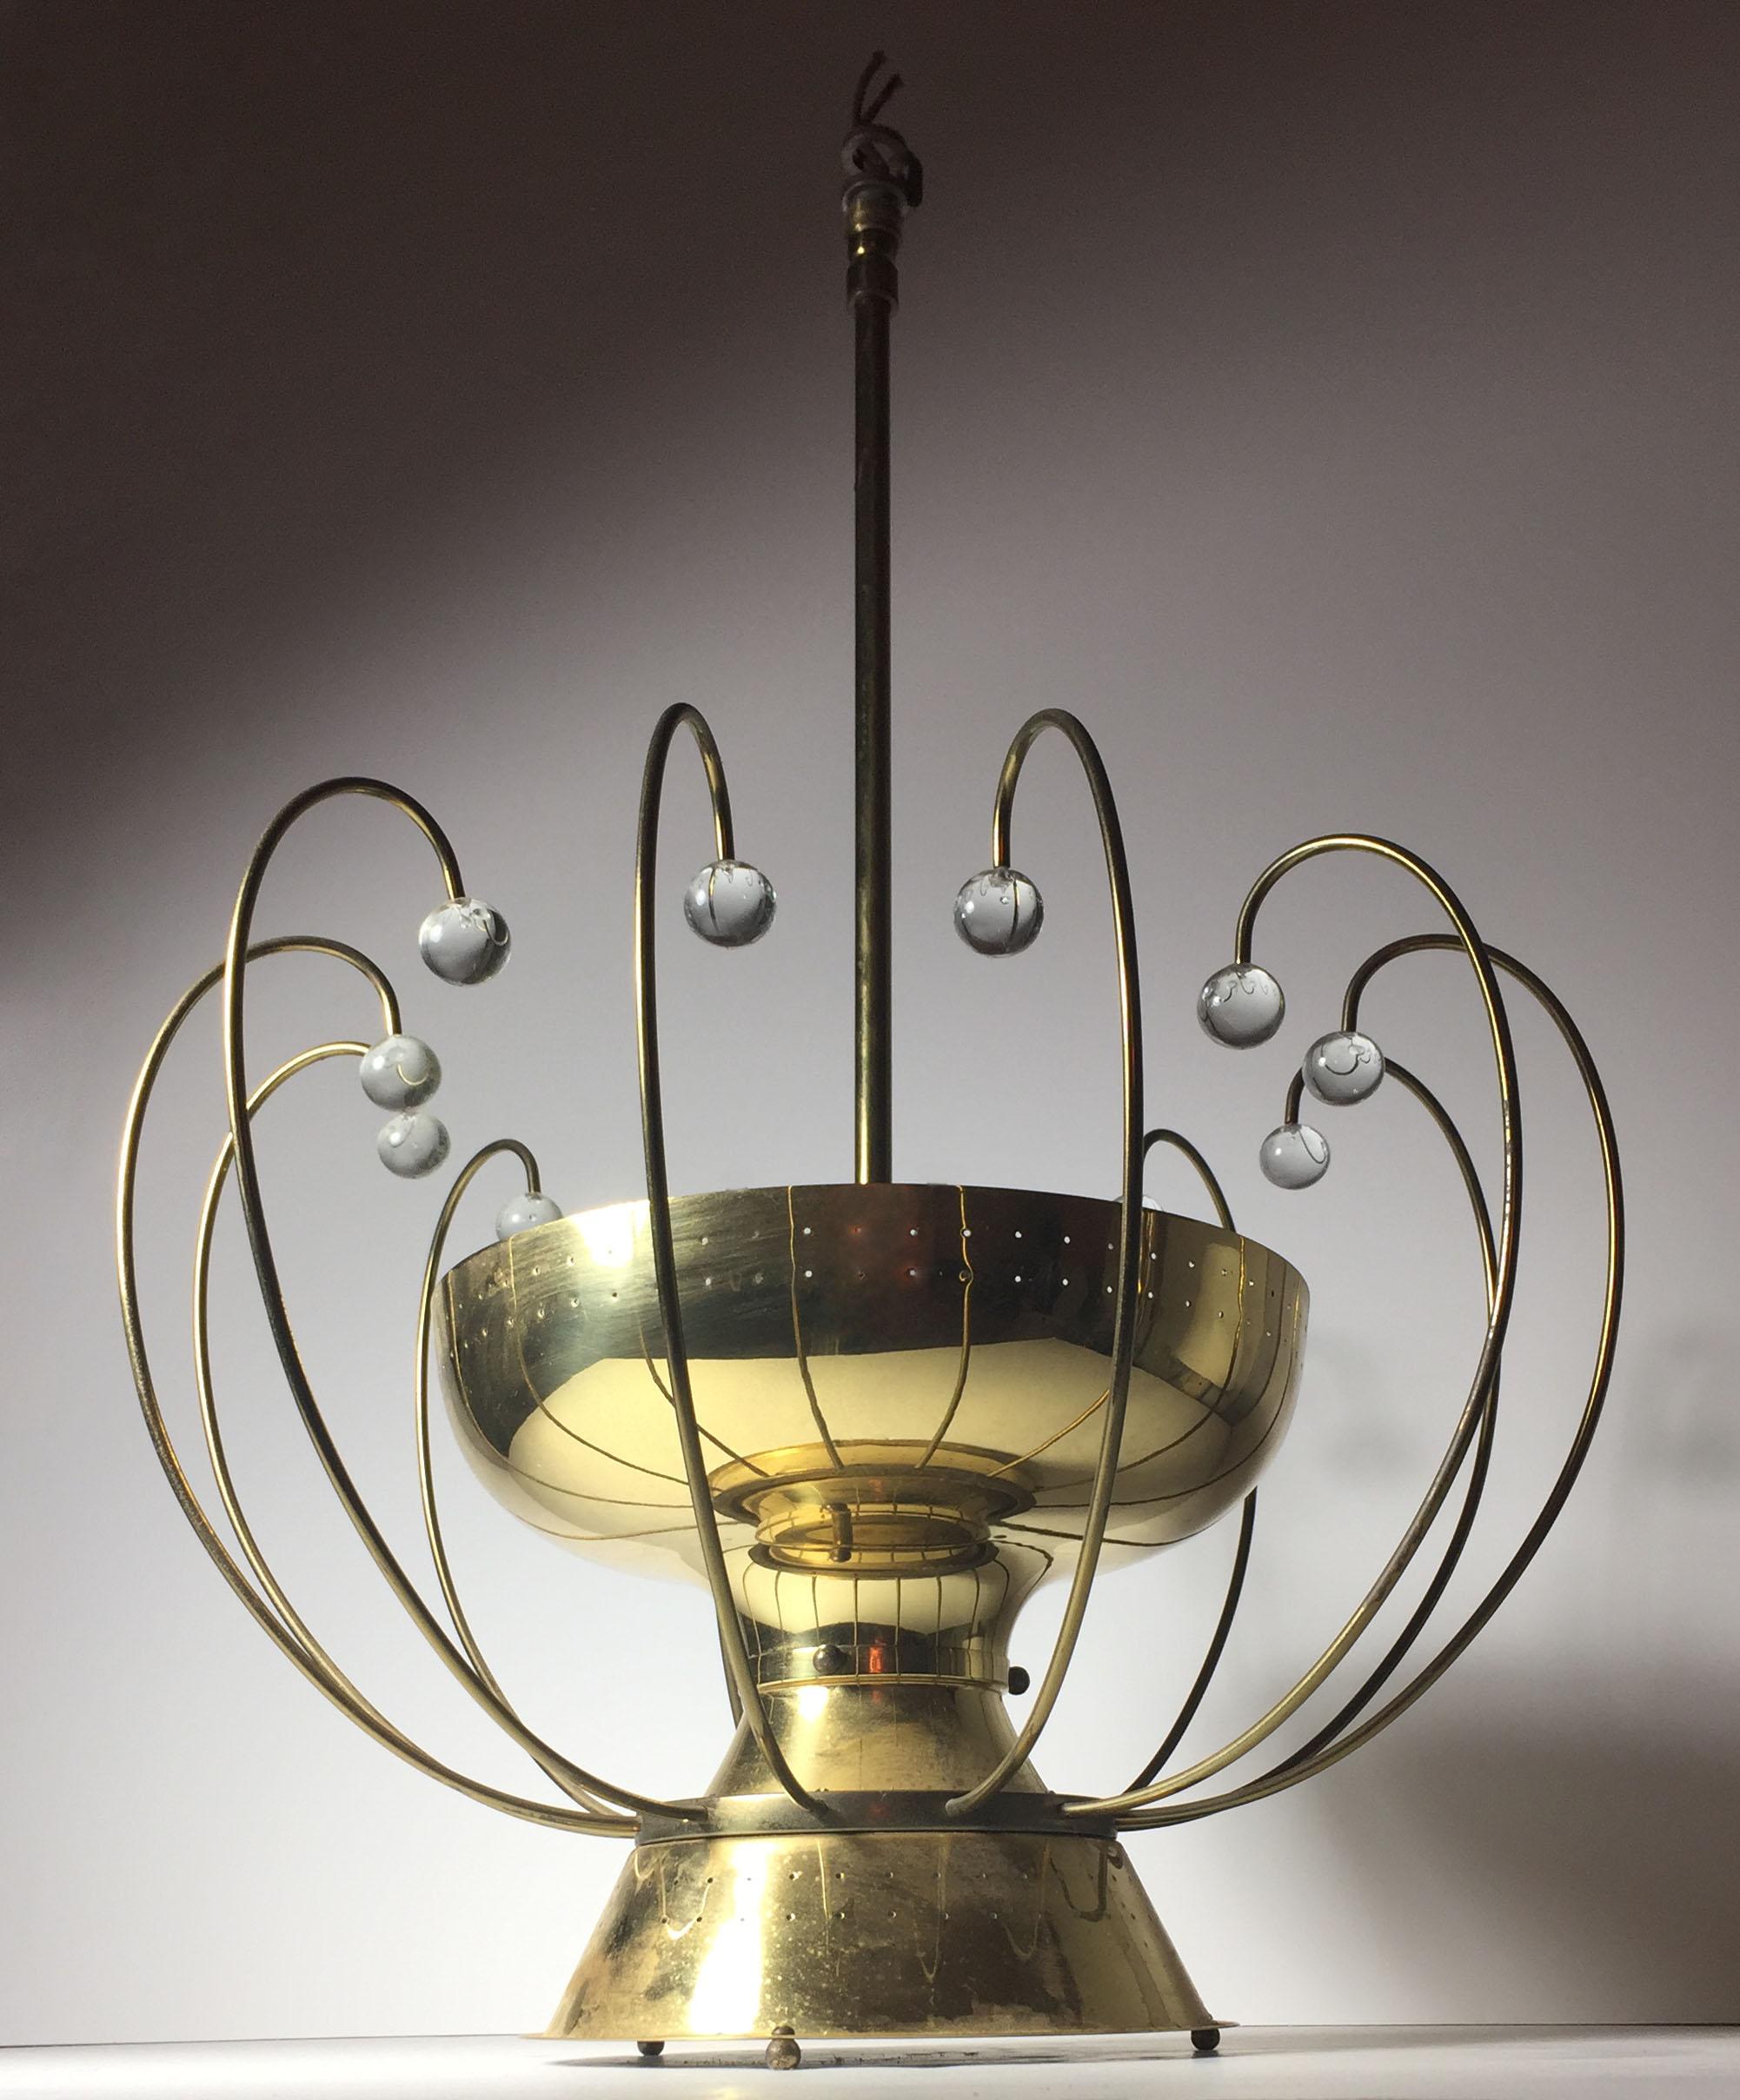 Vintage Lightolier fixture with large crystal beads attributed to Gerald Thurston. A quality vintage fixture. Reminiscent of Italian fixtures by Arredoluce by Gino Sarfatti and Paavo Tynell

I believe this probably originally had a glass diffuser at